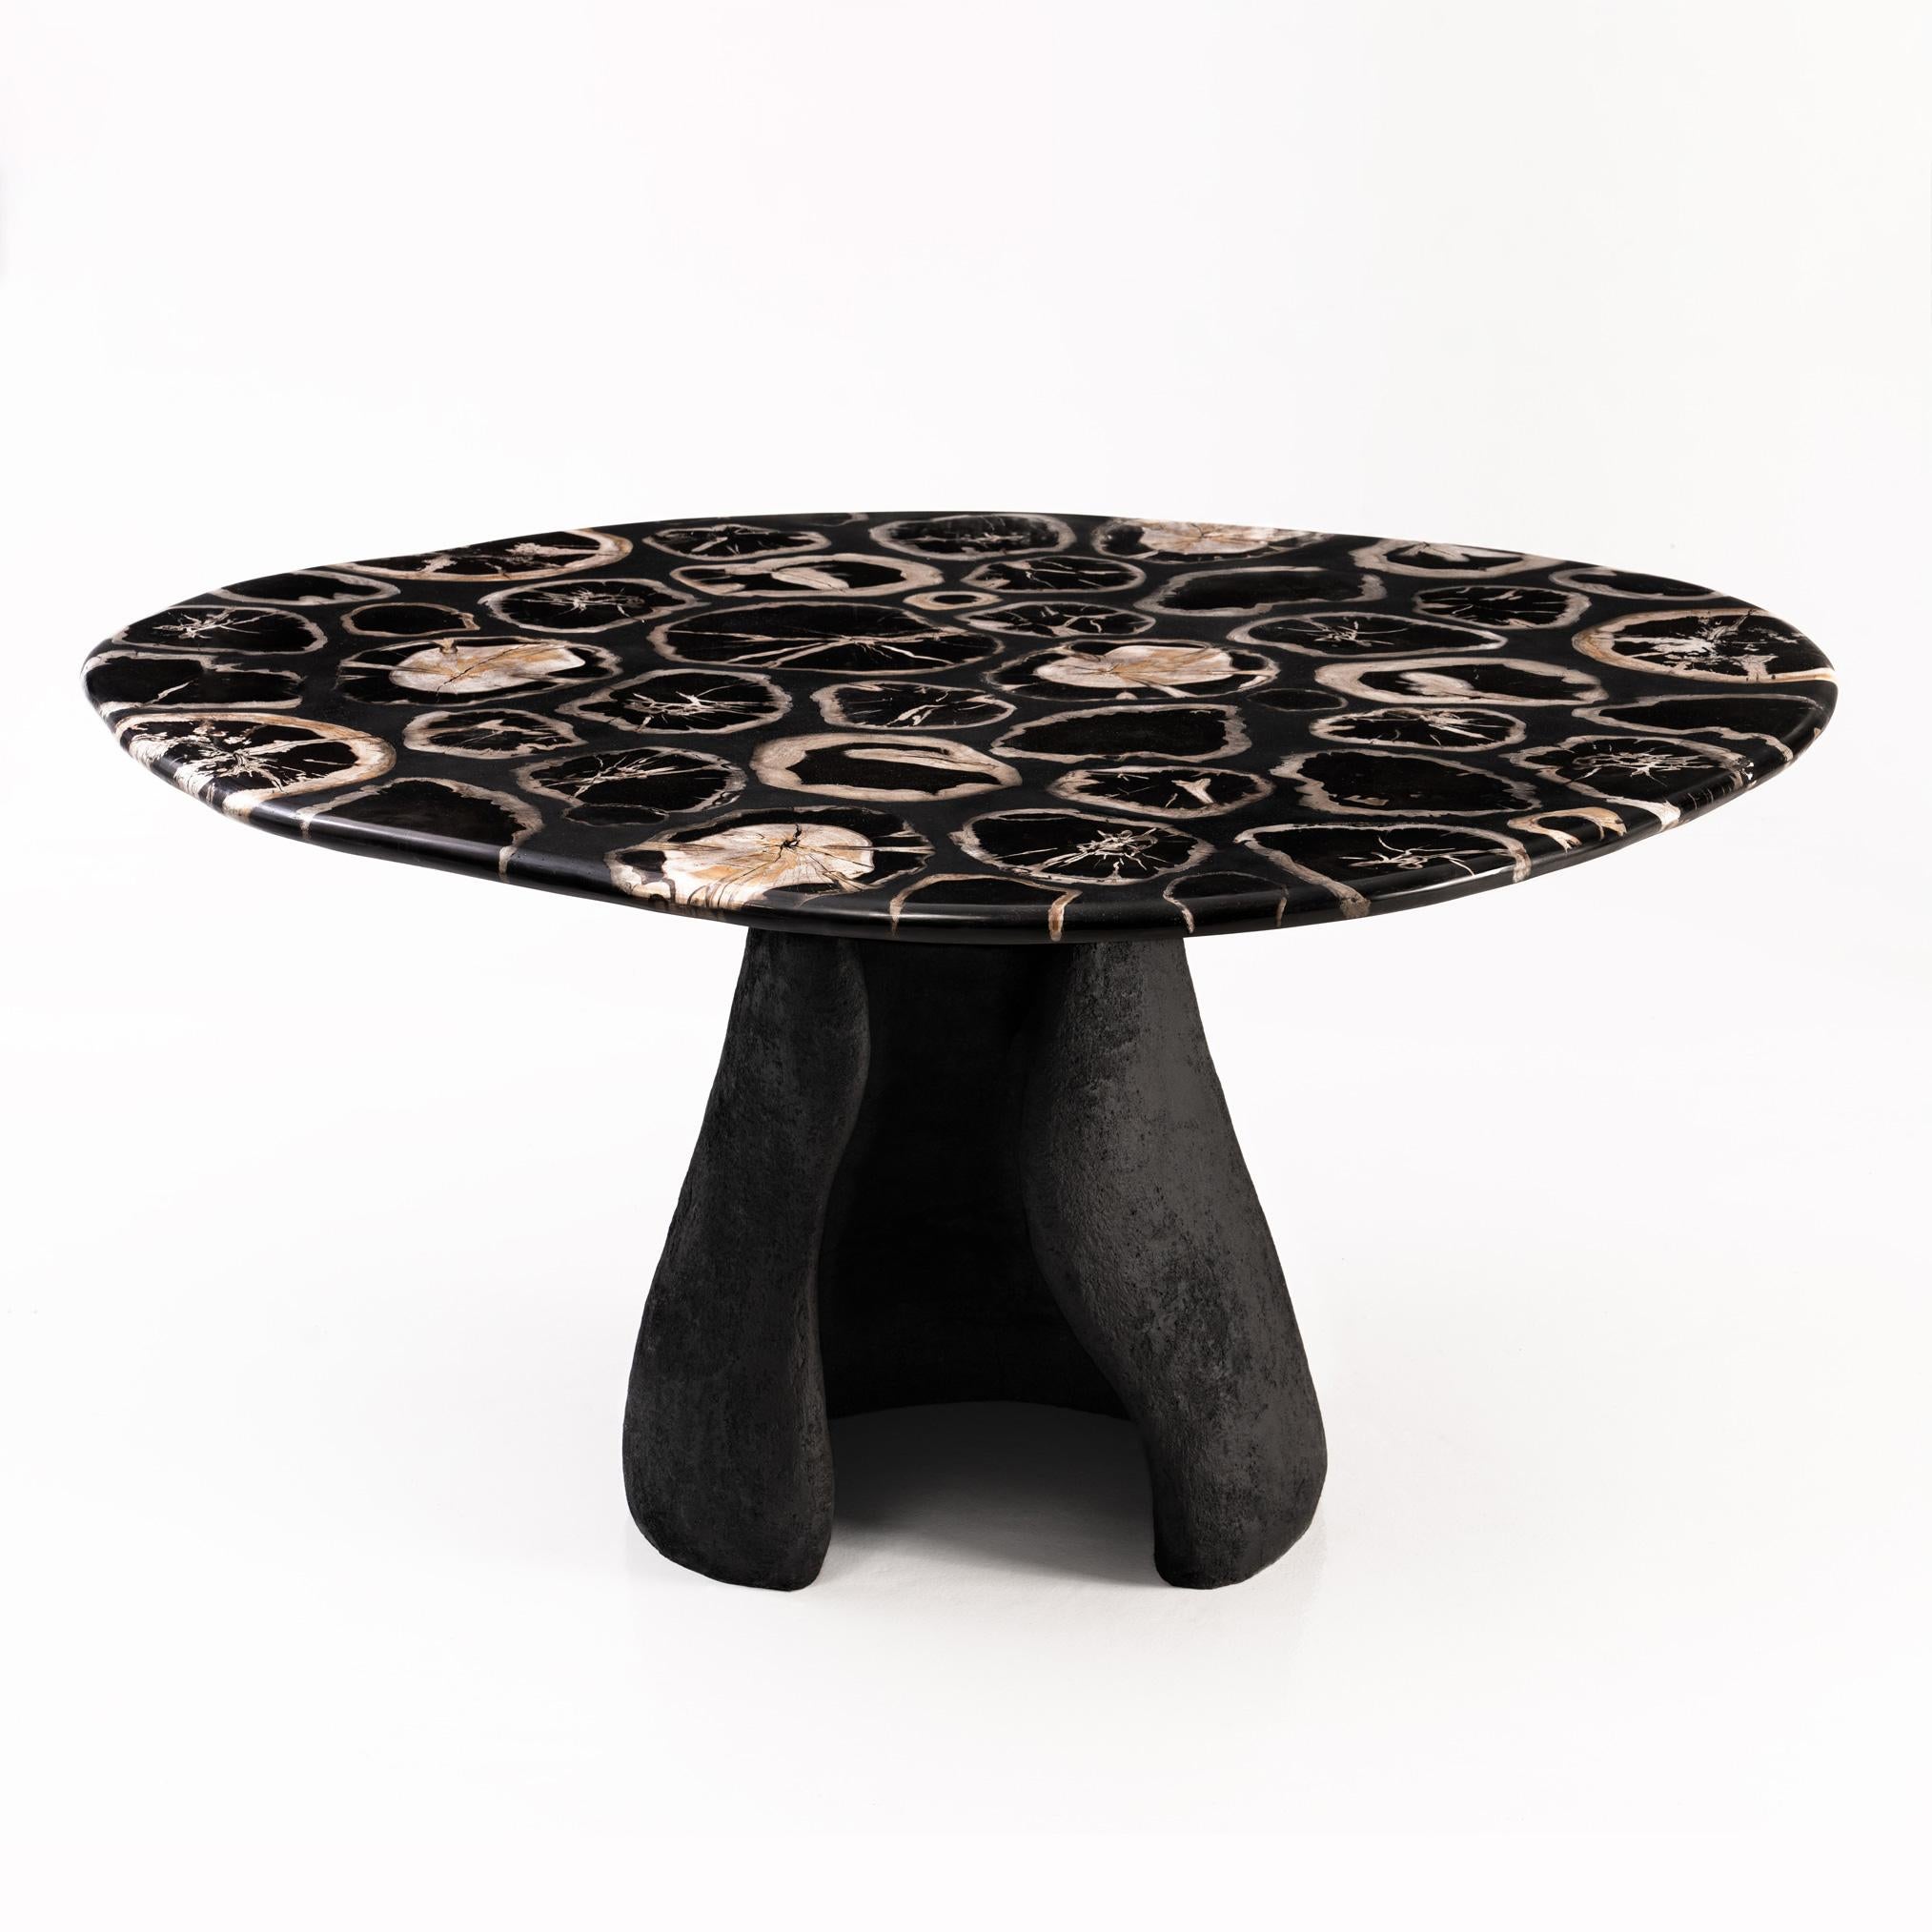 True Grit Dining Table by Odditi
Unique and Numbered
Dimensions: W 150 x D 146 x H 75 cm
Materials: Petrified Wood, Lava Stone, Granite

'True Grit’ is a perfectly imperfect sculptural dining table, featuring curated and artfully arranged, rare raw